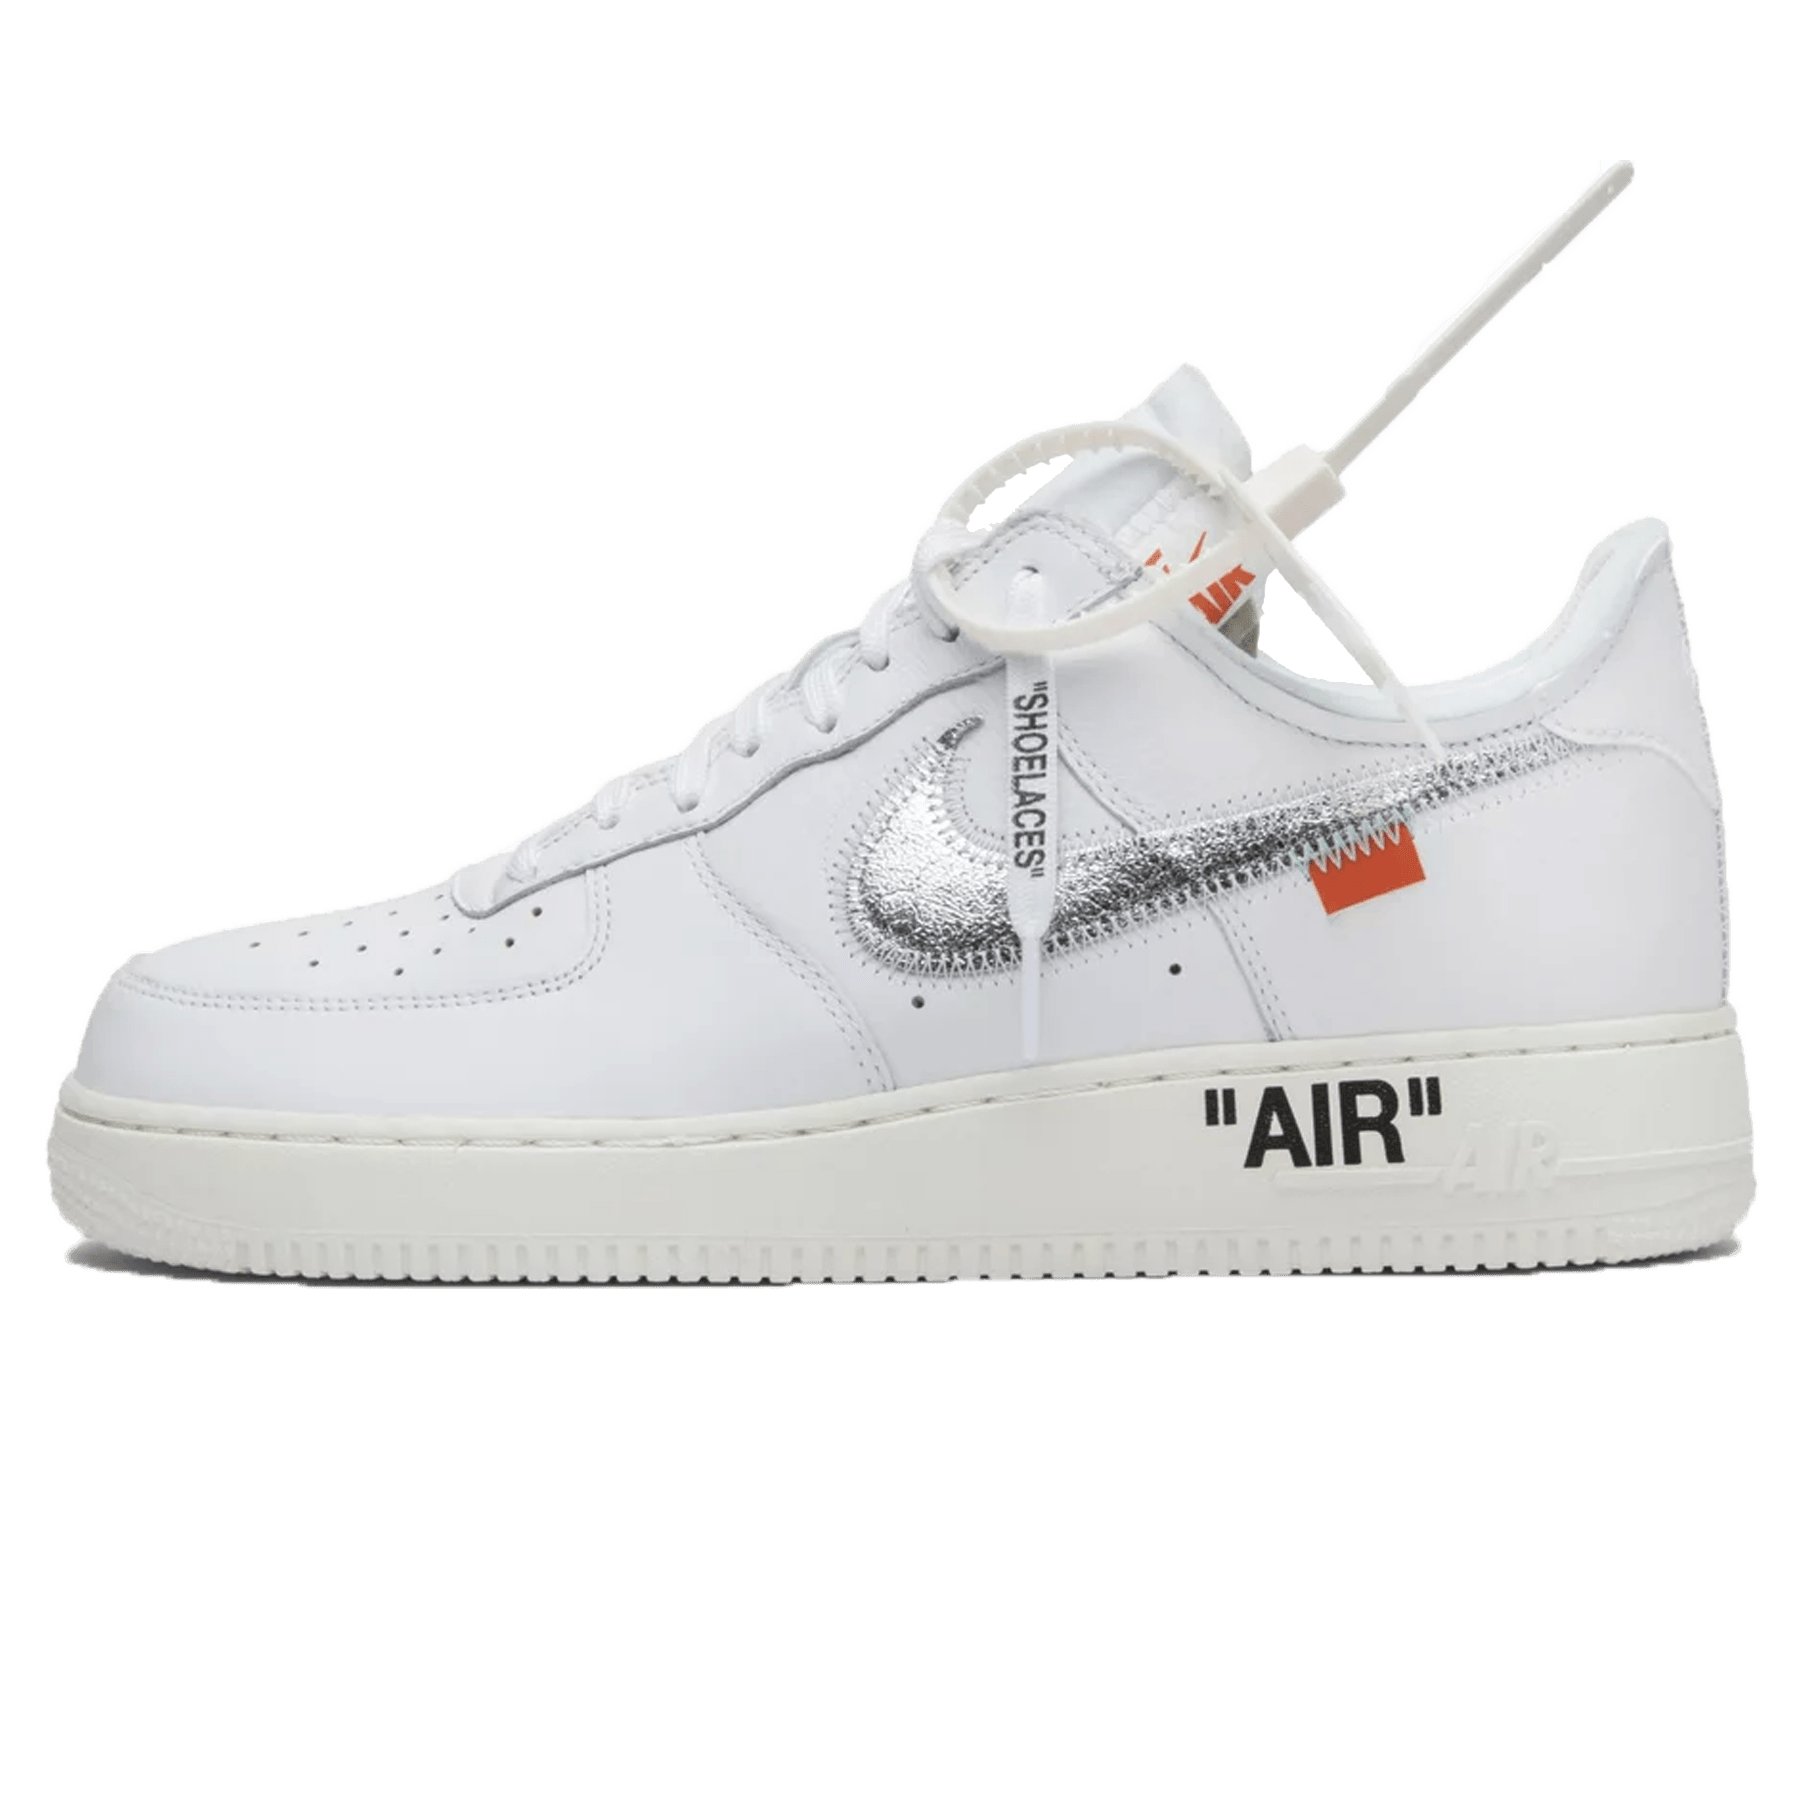 Nike Air Force 1 Low Off-White Complexcon